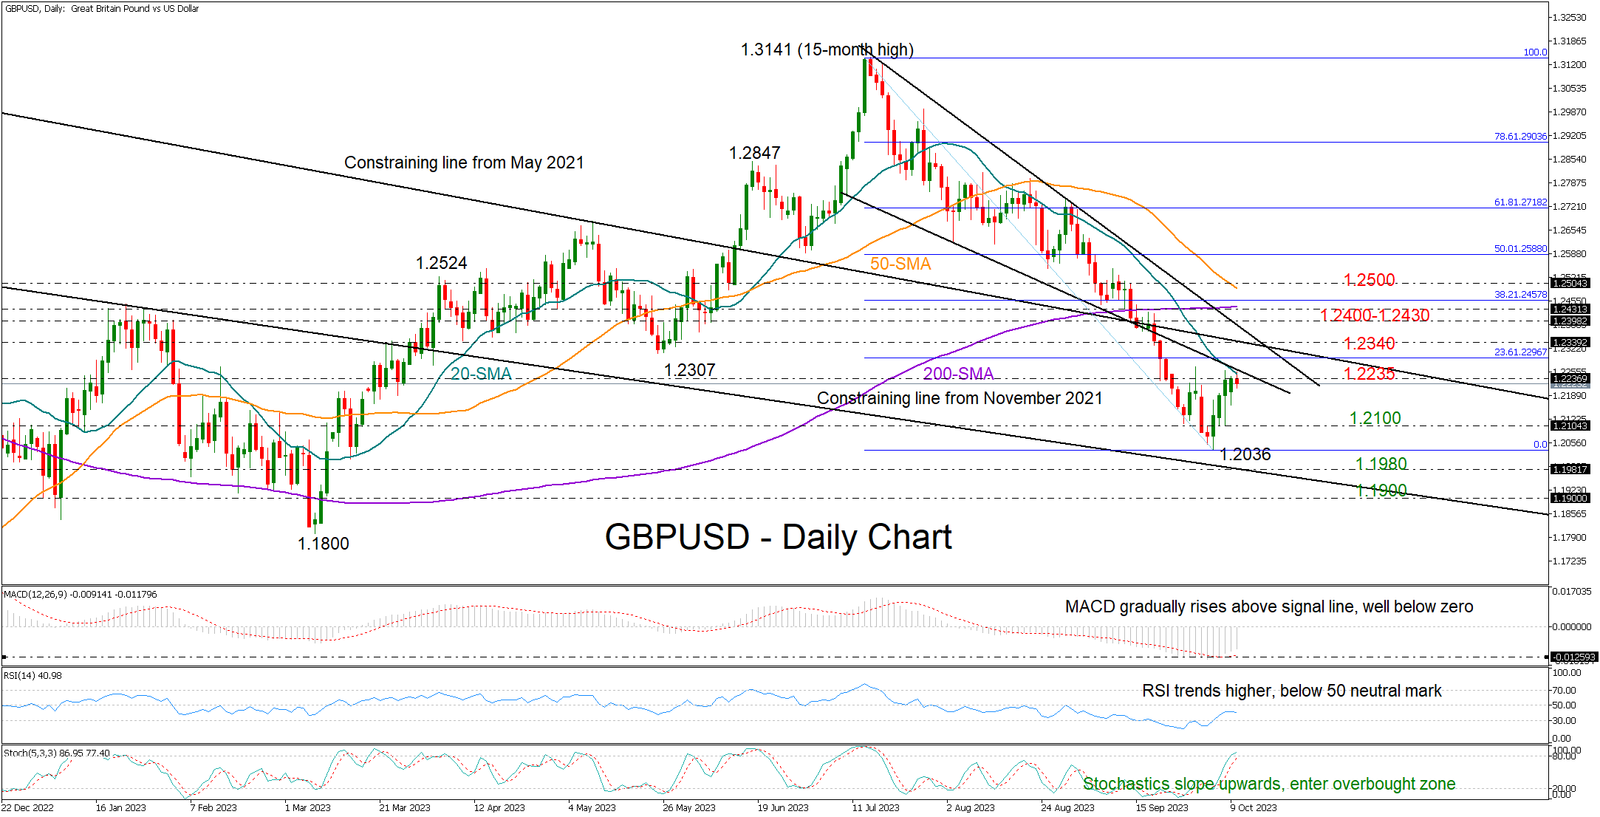 Technical Analysis – GBPUSD retains upswing but needs more backing